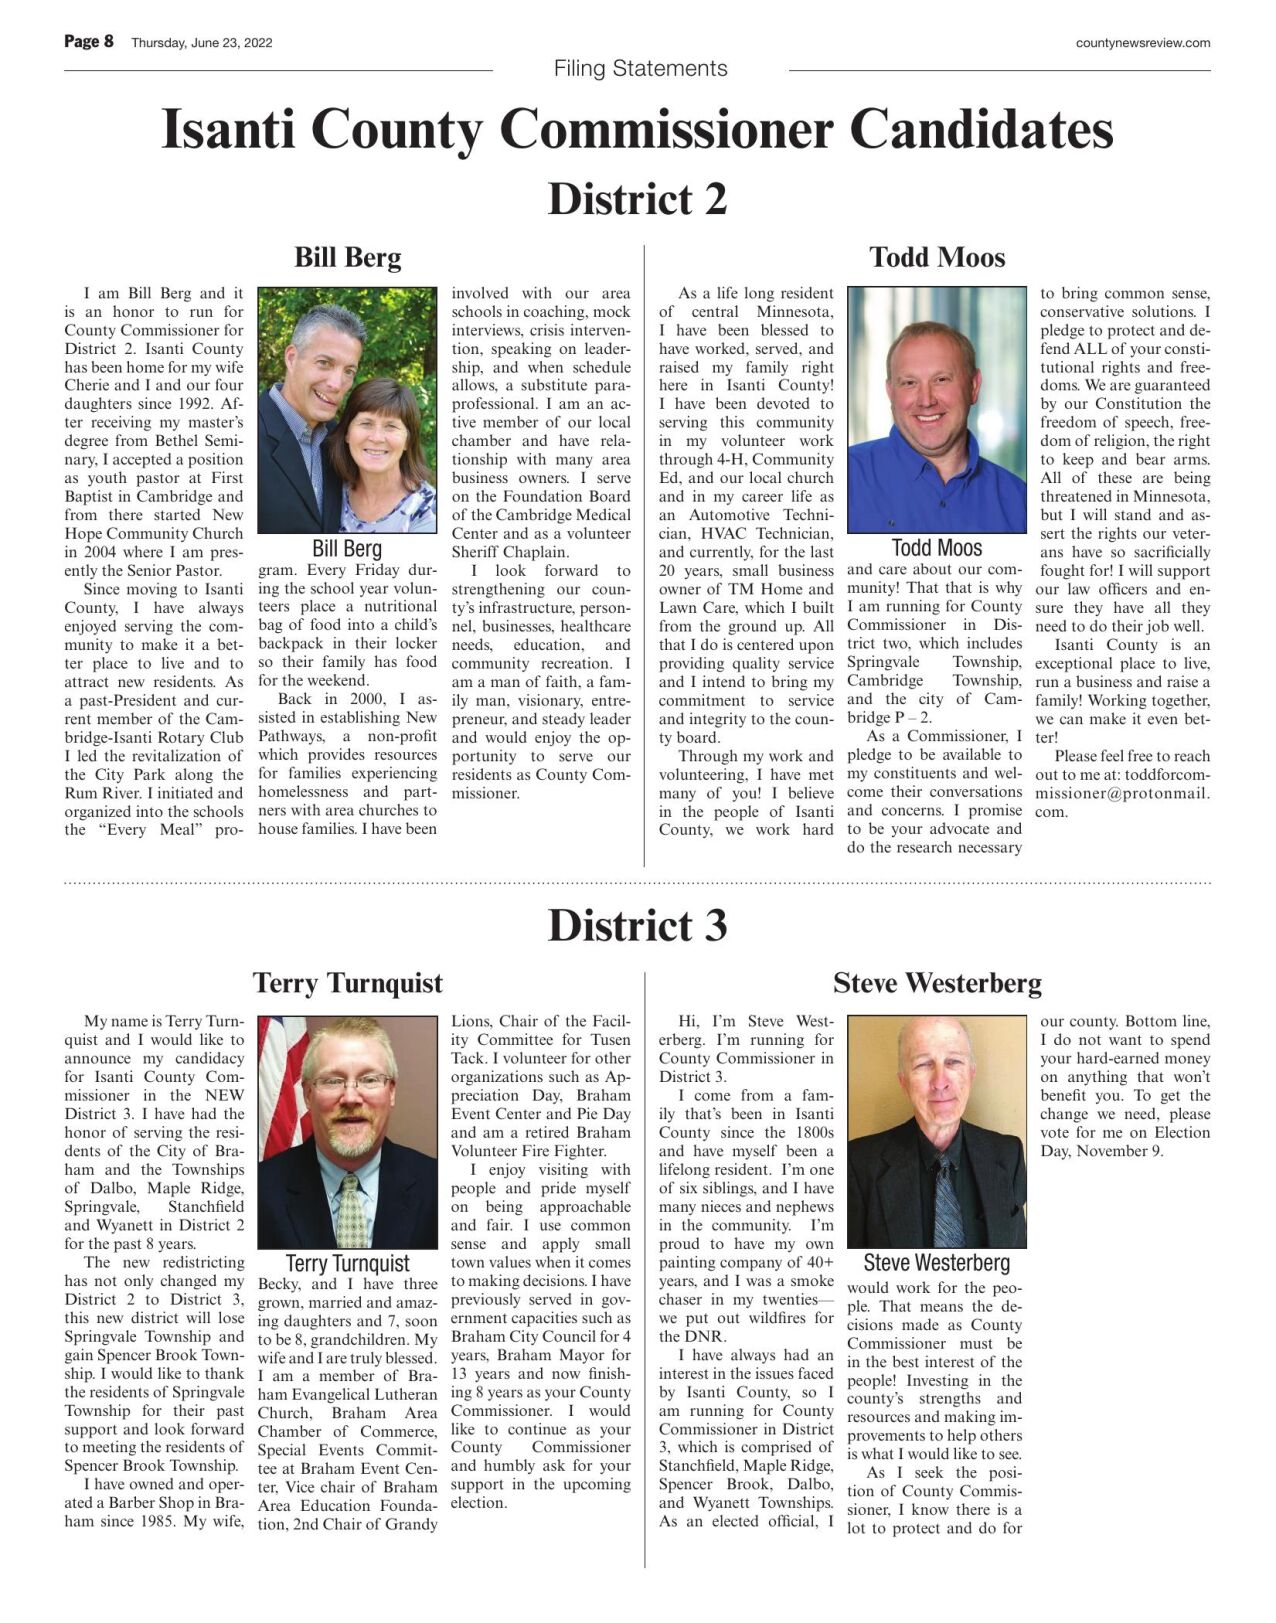 Filing statements for Isanti County Commissioner candidates